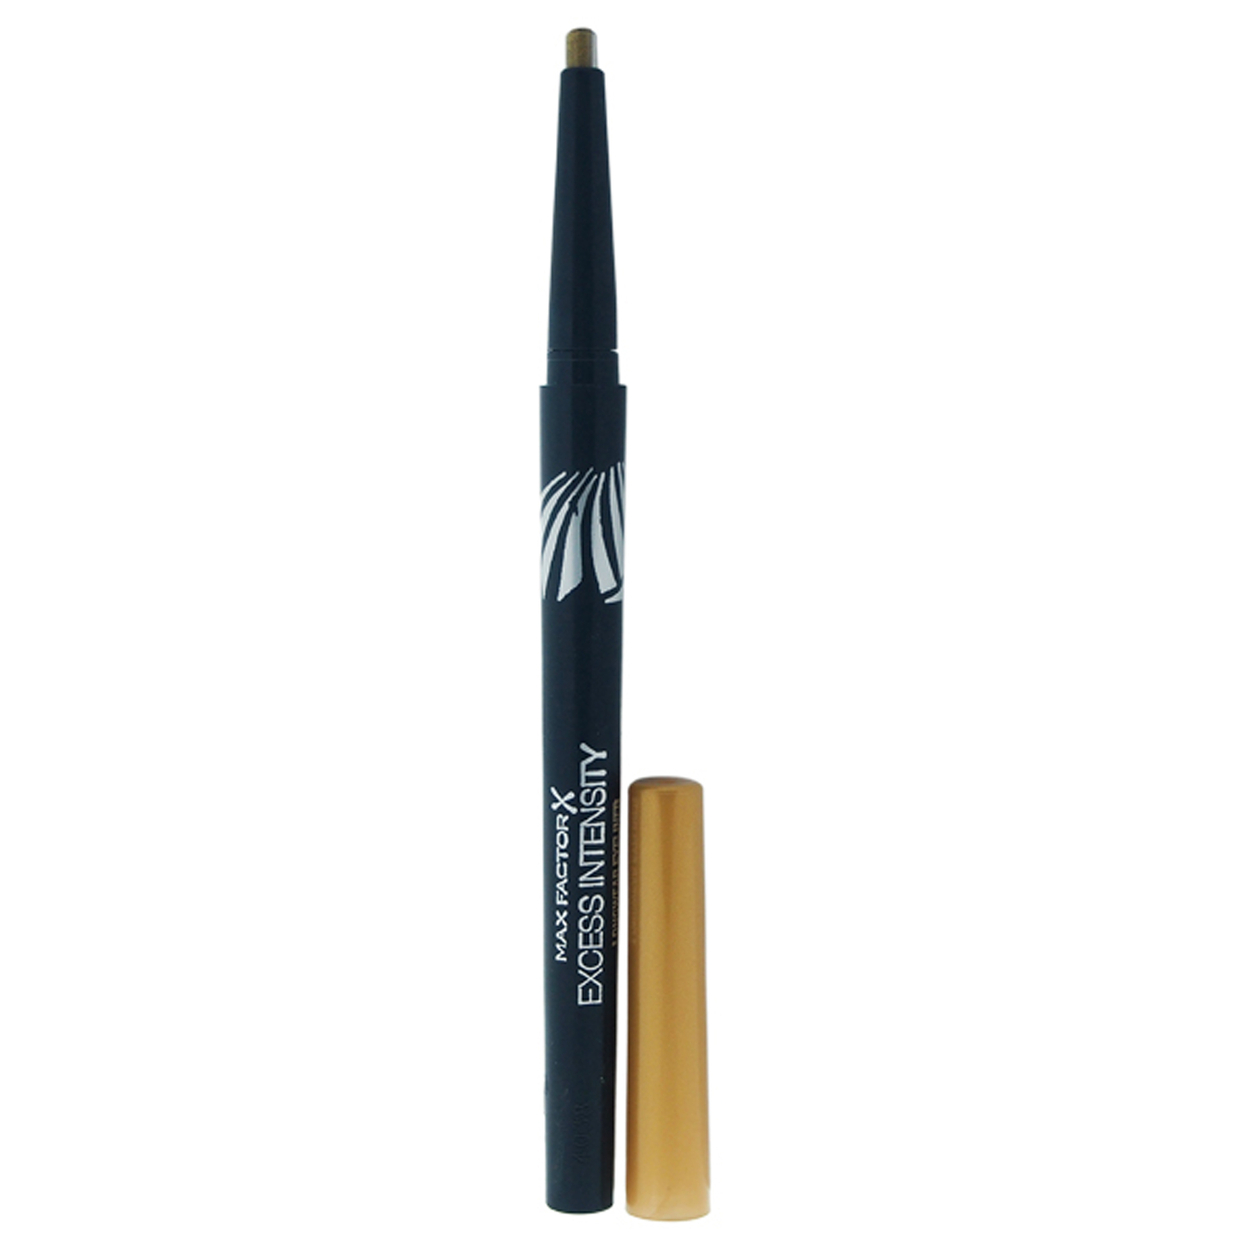 EAN 4015600805302 product image for Max Factor Excess Intensity Longwear Eyeliner - 01 Excessive Gold 0.006 oz | upcitemdb.com